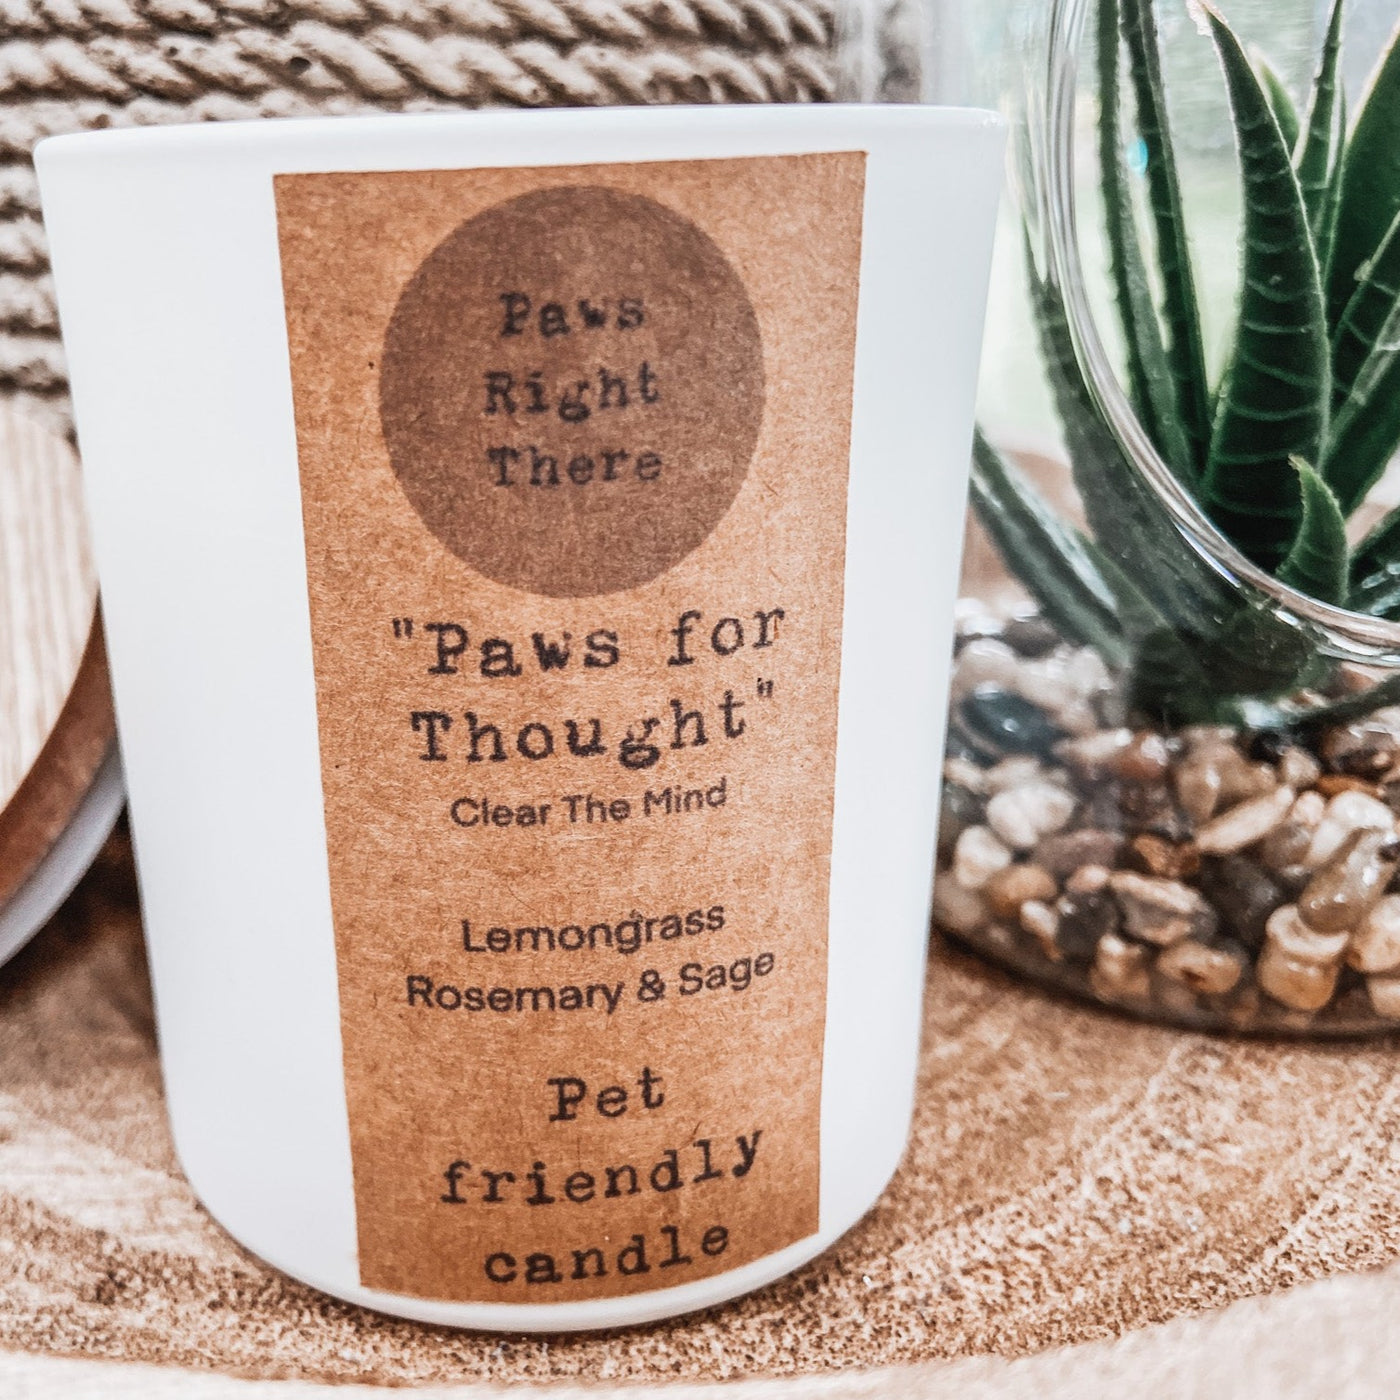 Paws For Thought - Pet Friendly Candle with lemongrass, rosemary and sage